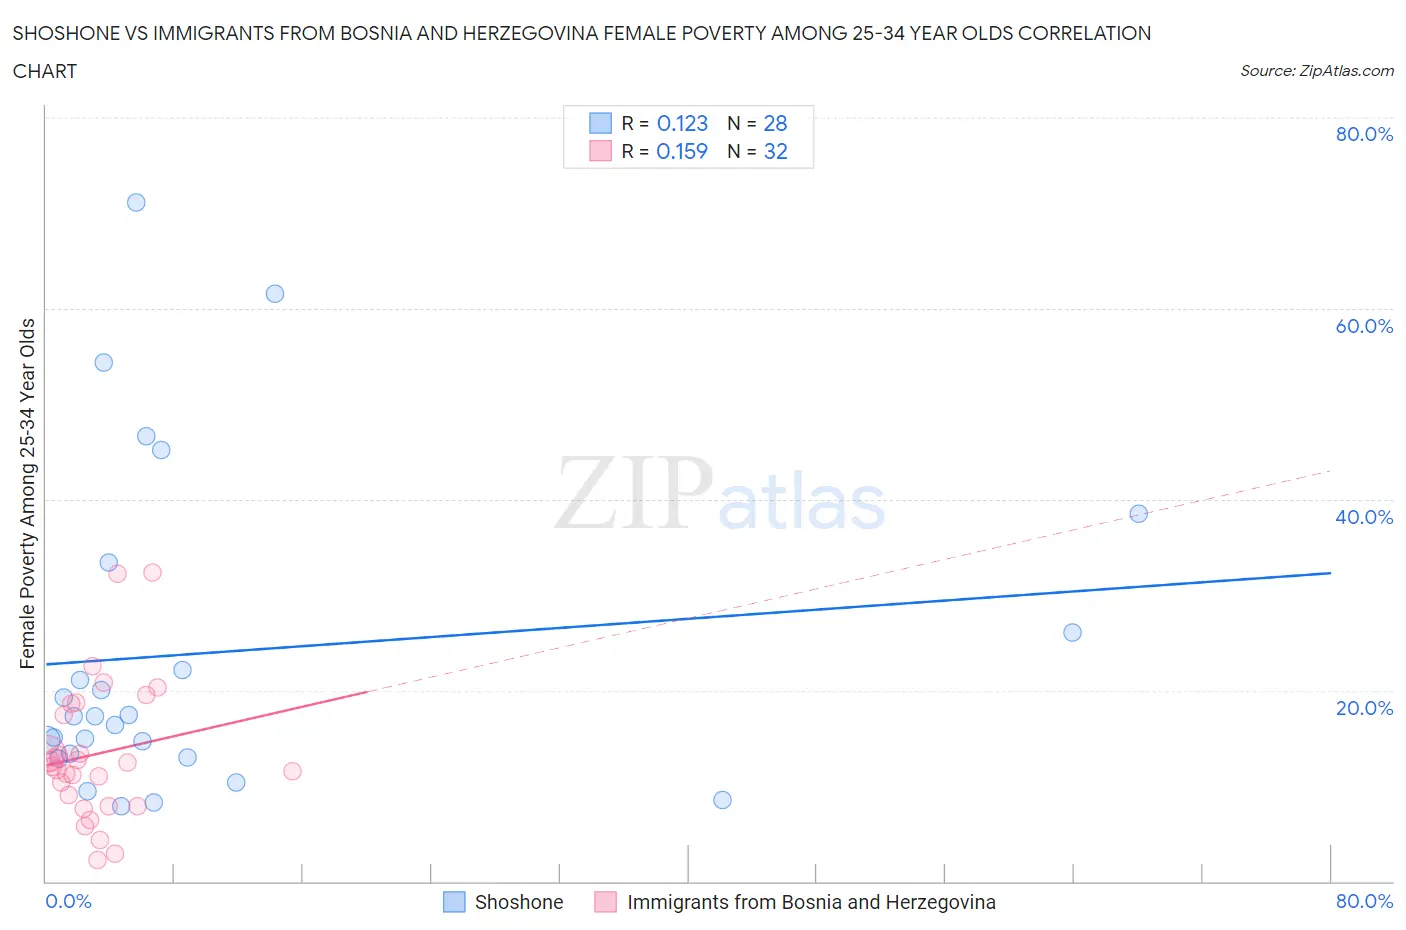 Shoshone vs Immigrants from Bosnia and Herzegovina Female Poverty Among 25-34 Year Olds